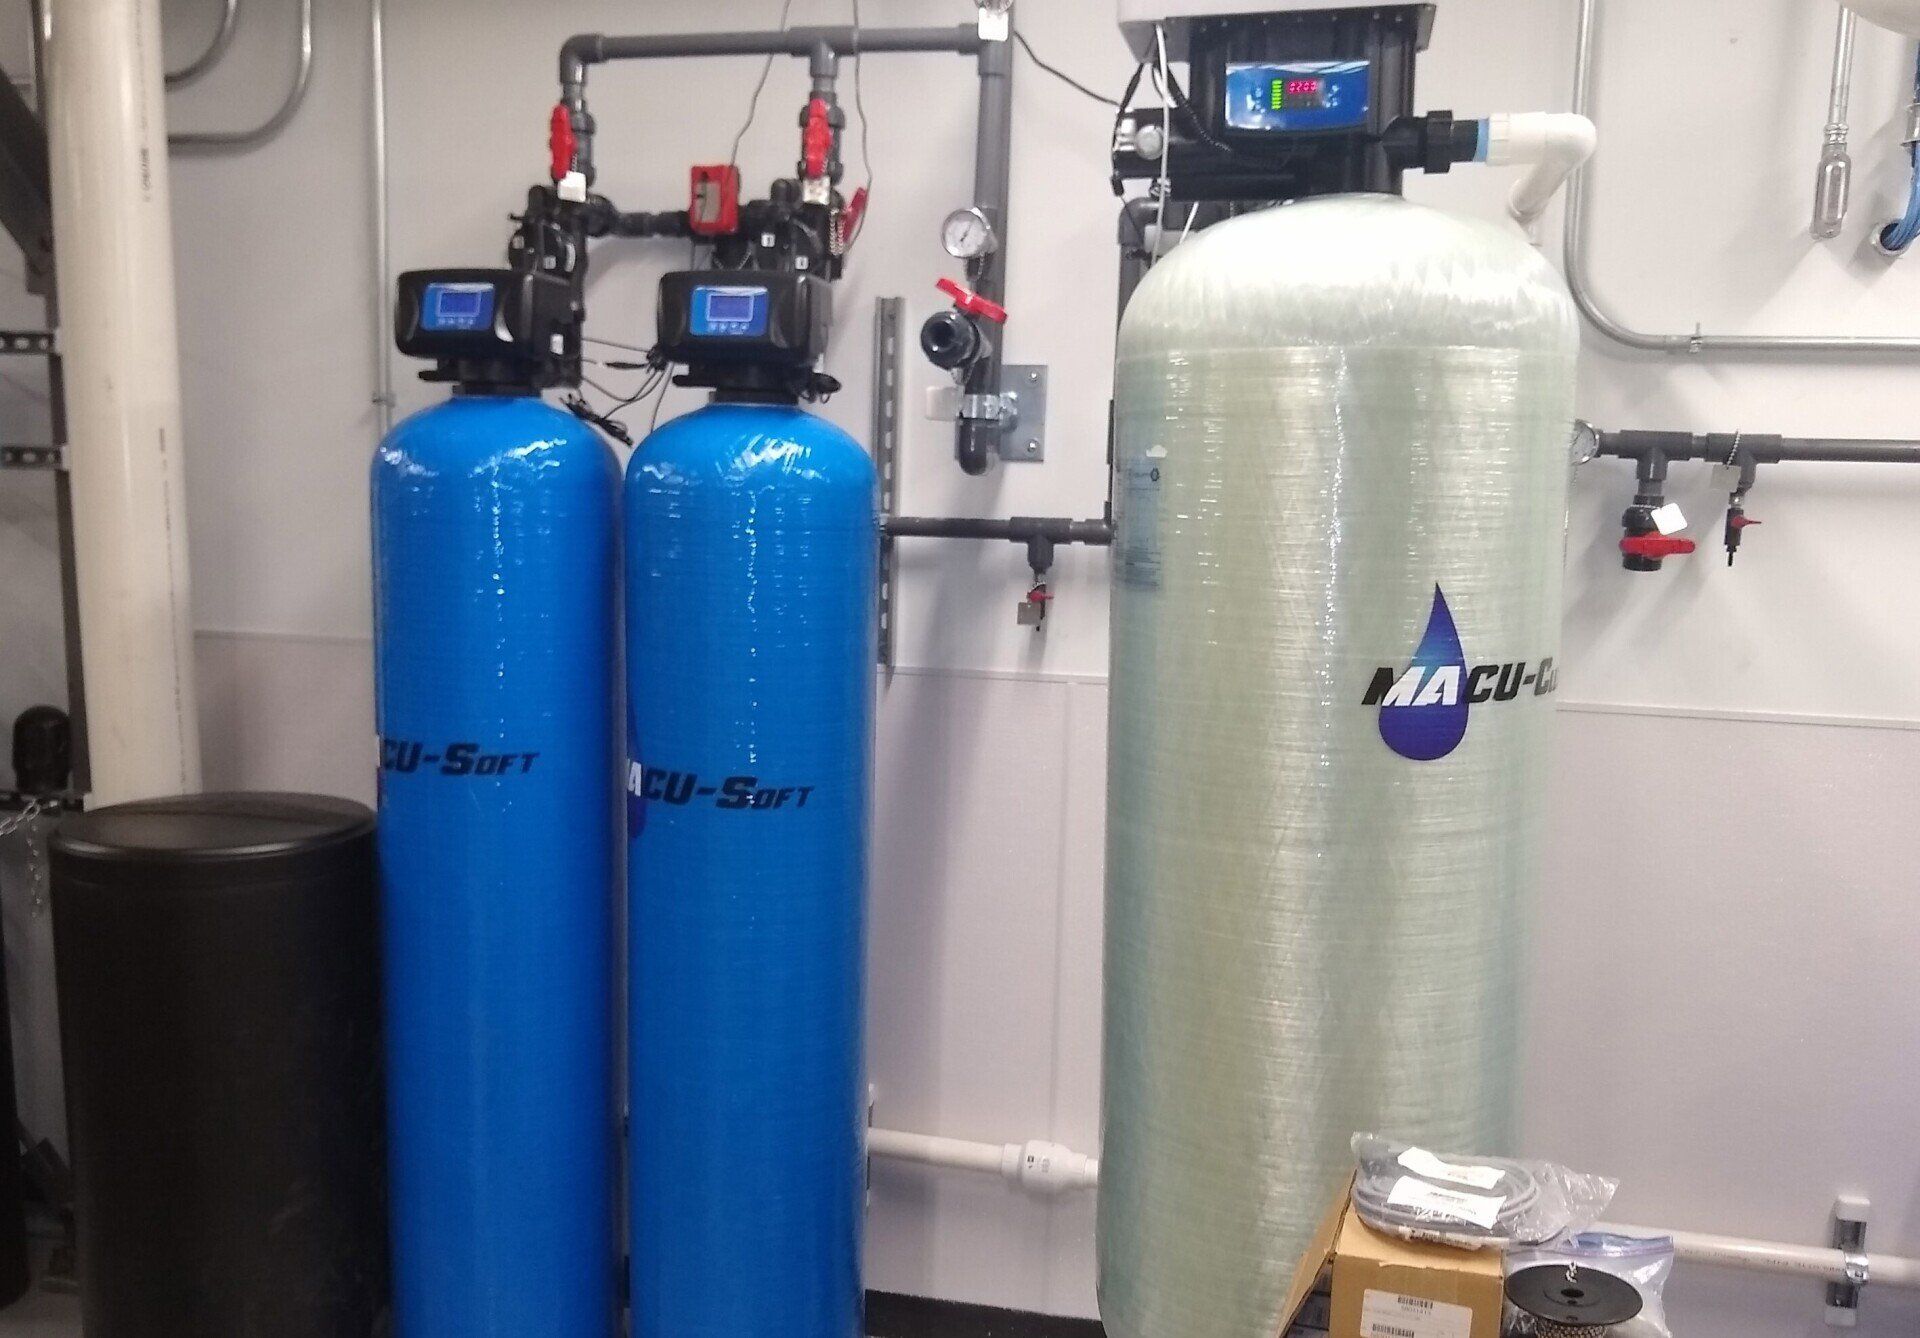 macu-clean filtration system